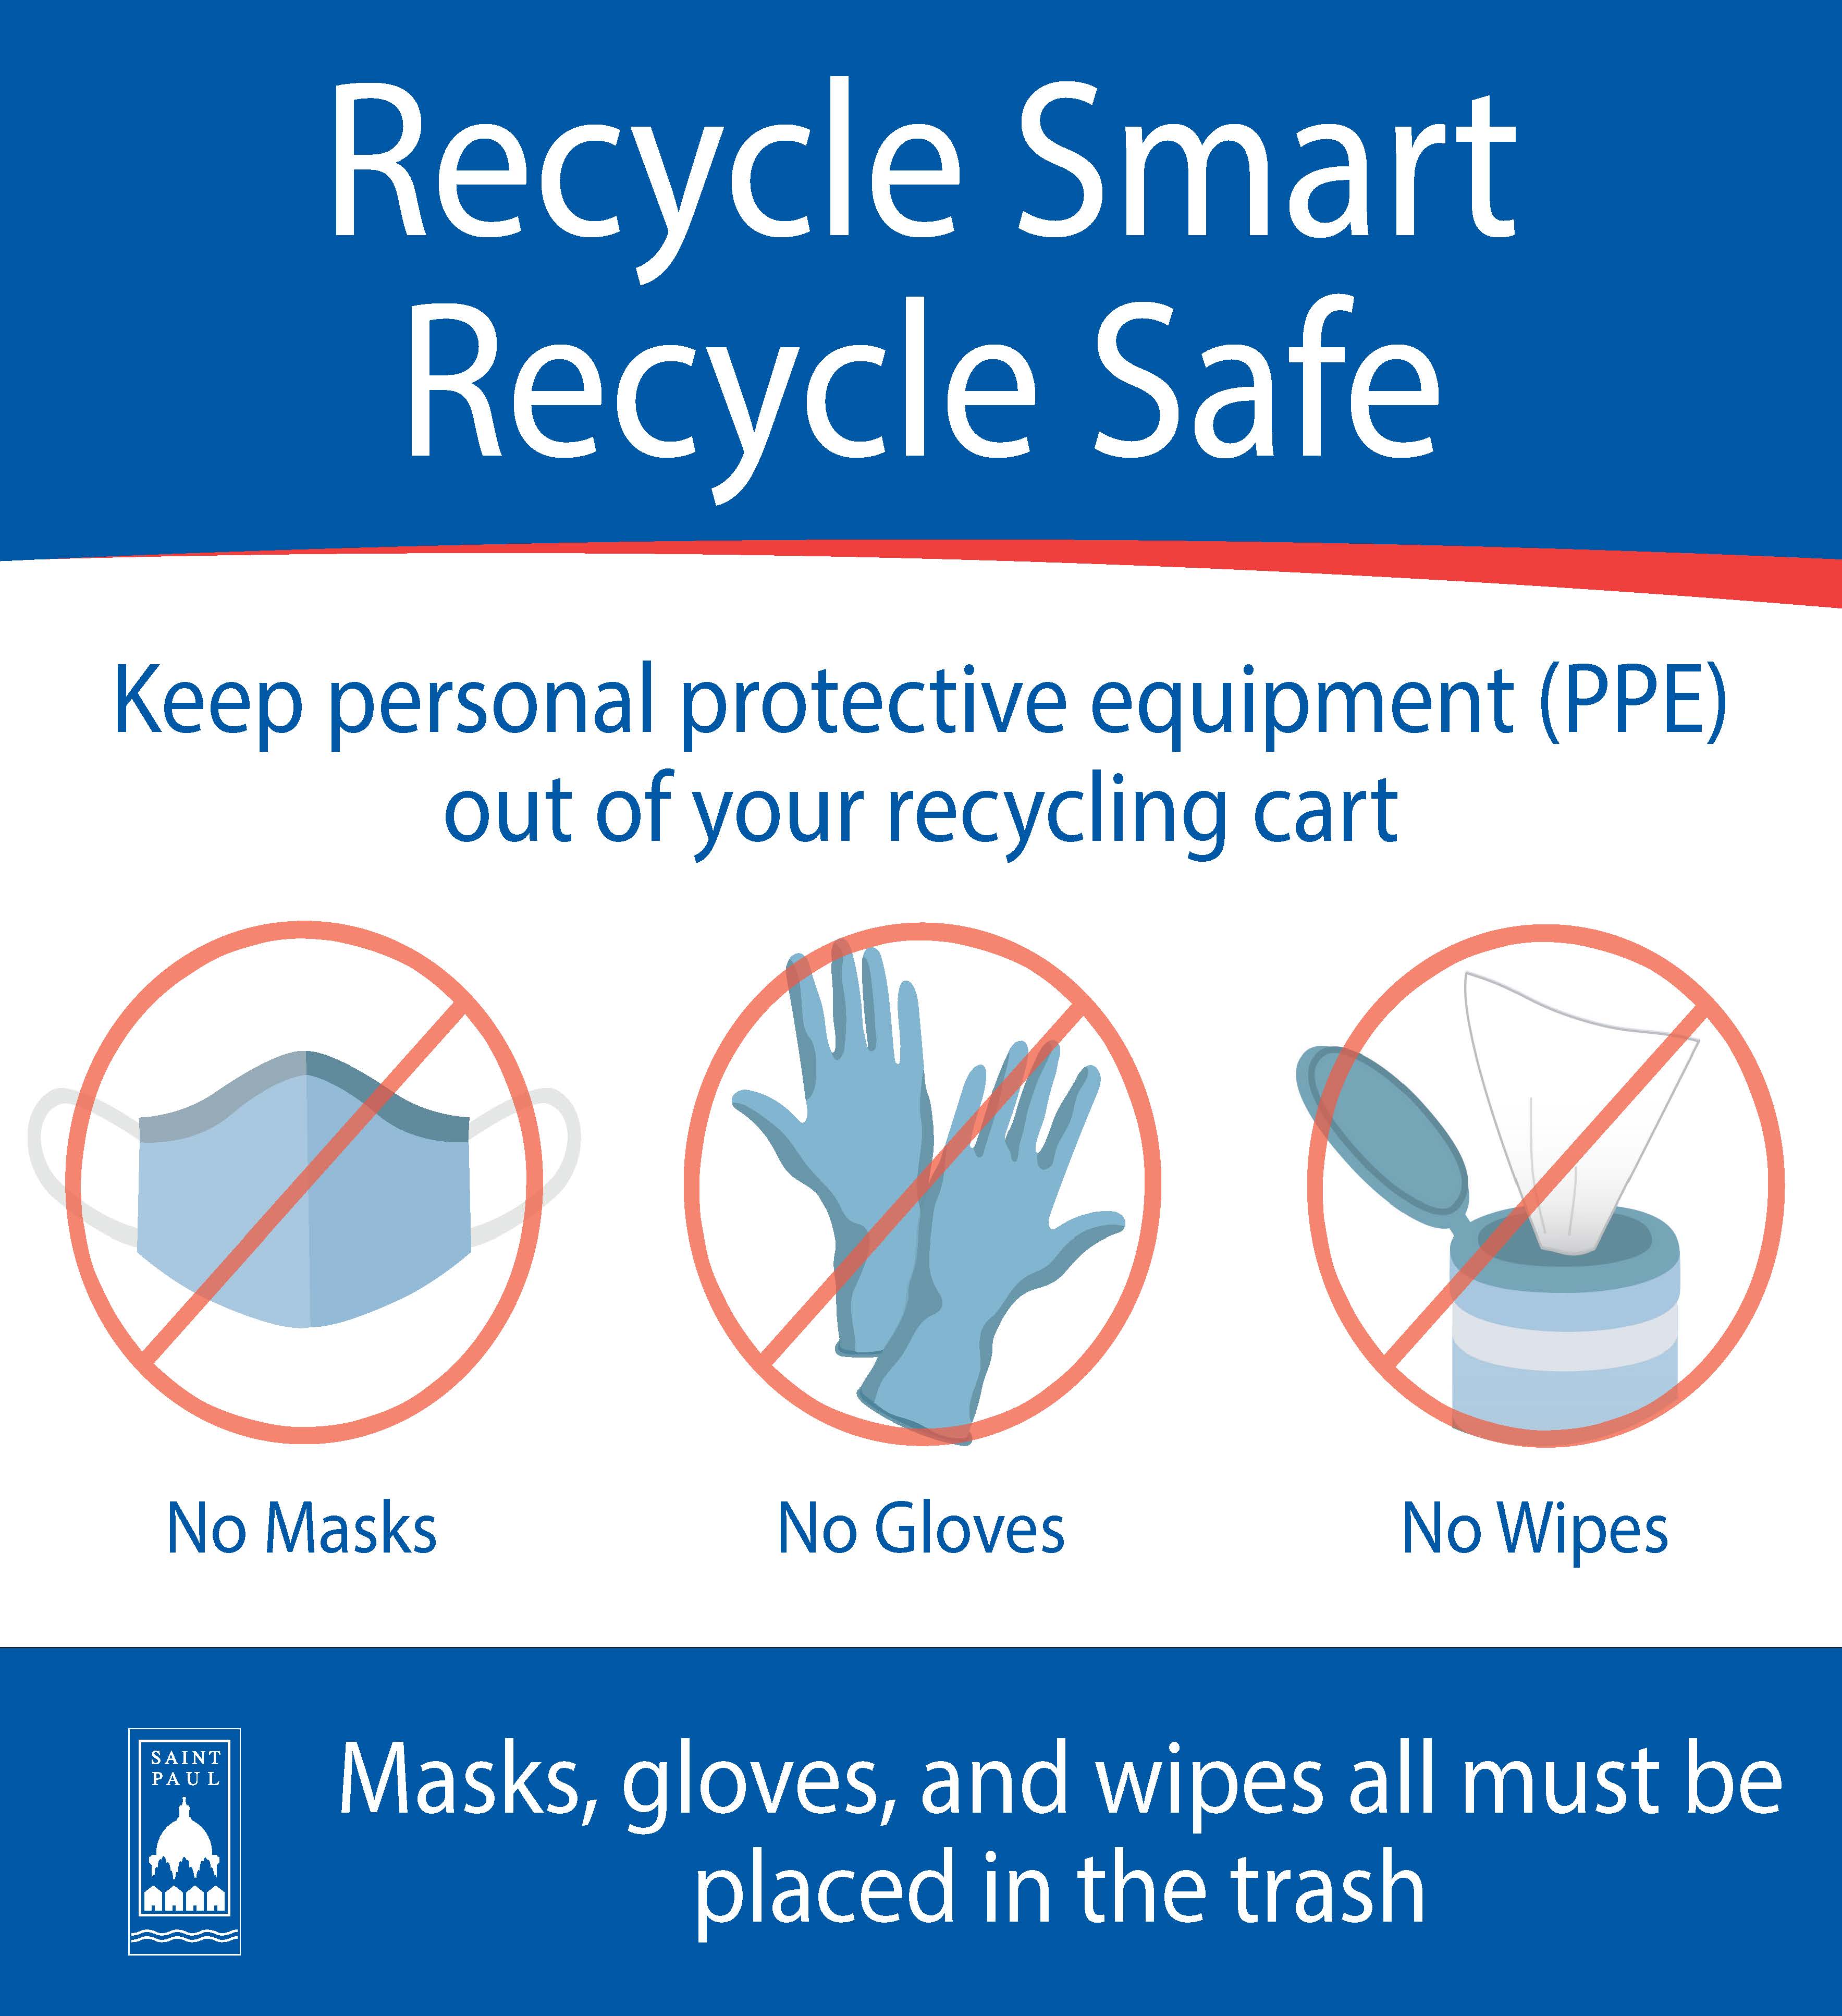 Image of a Recycle Smart Poster displaying PPE